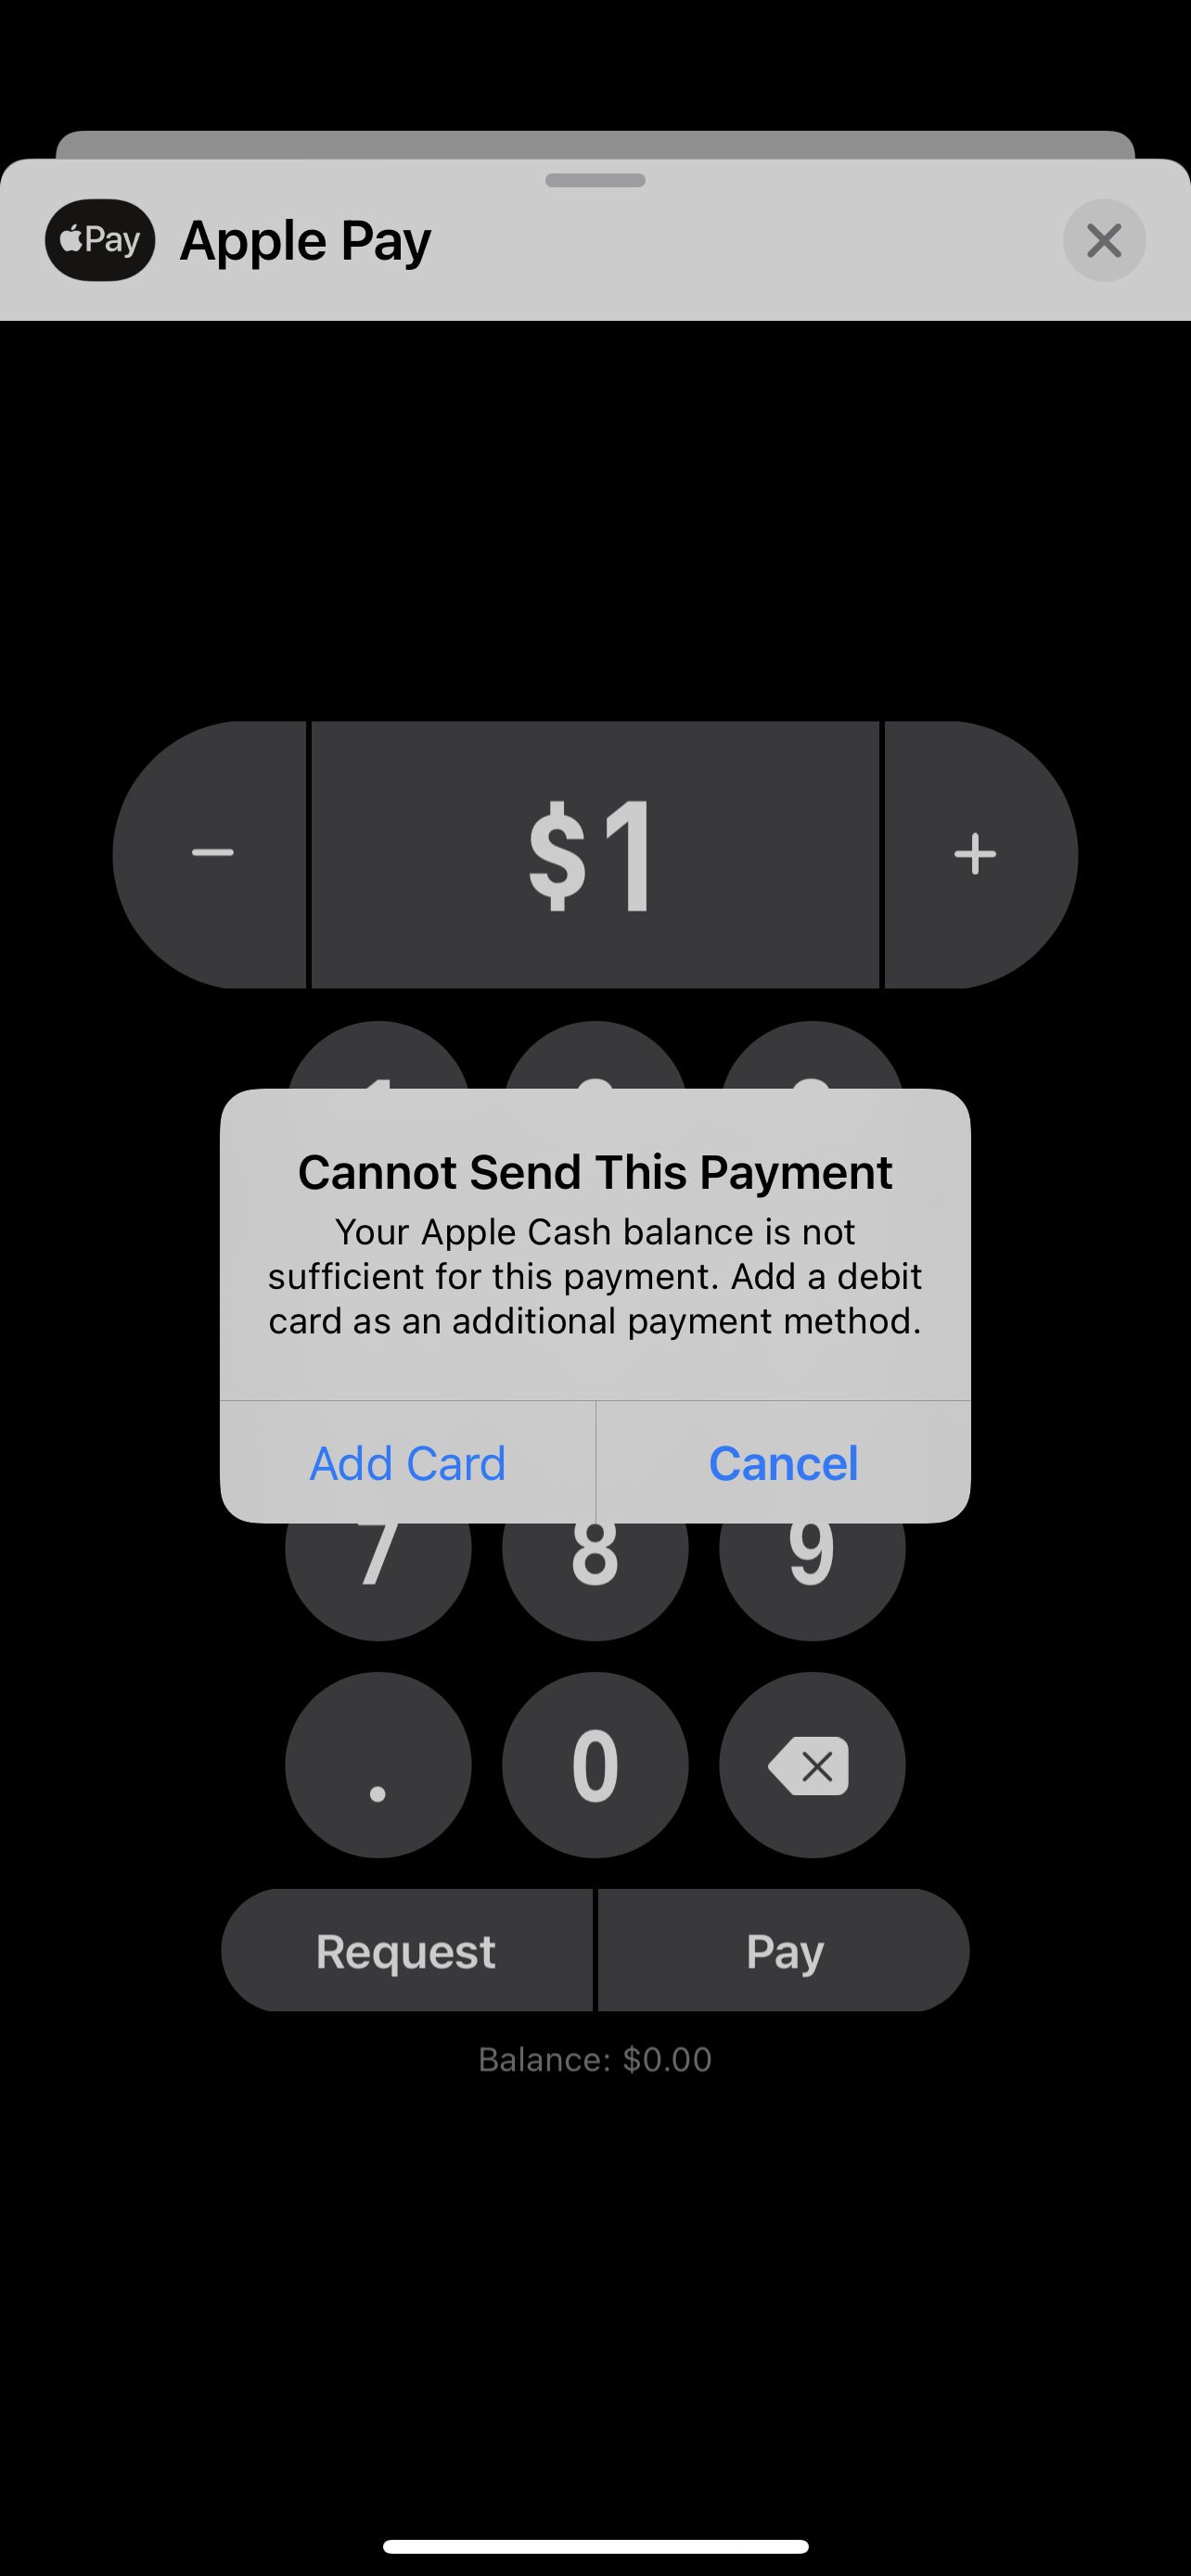 s Visa card will work with Apple Pay, just not right away